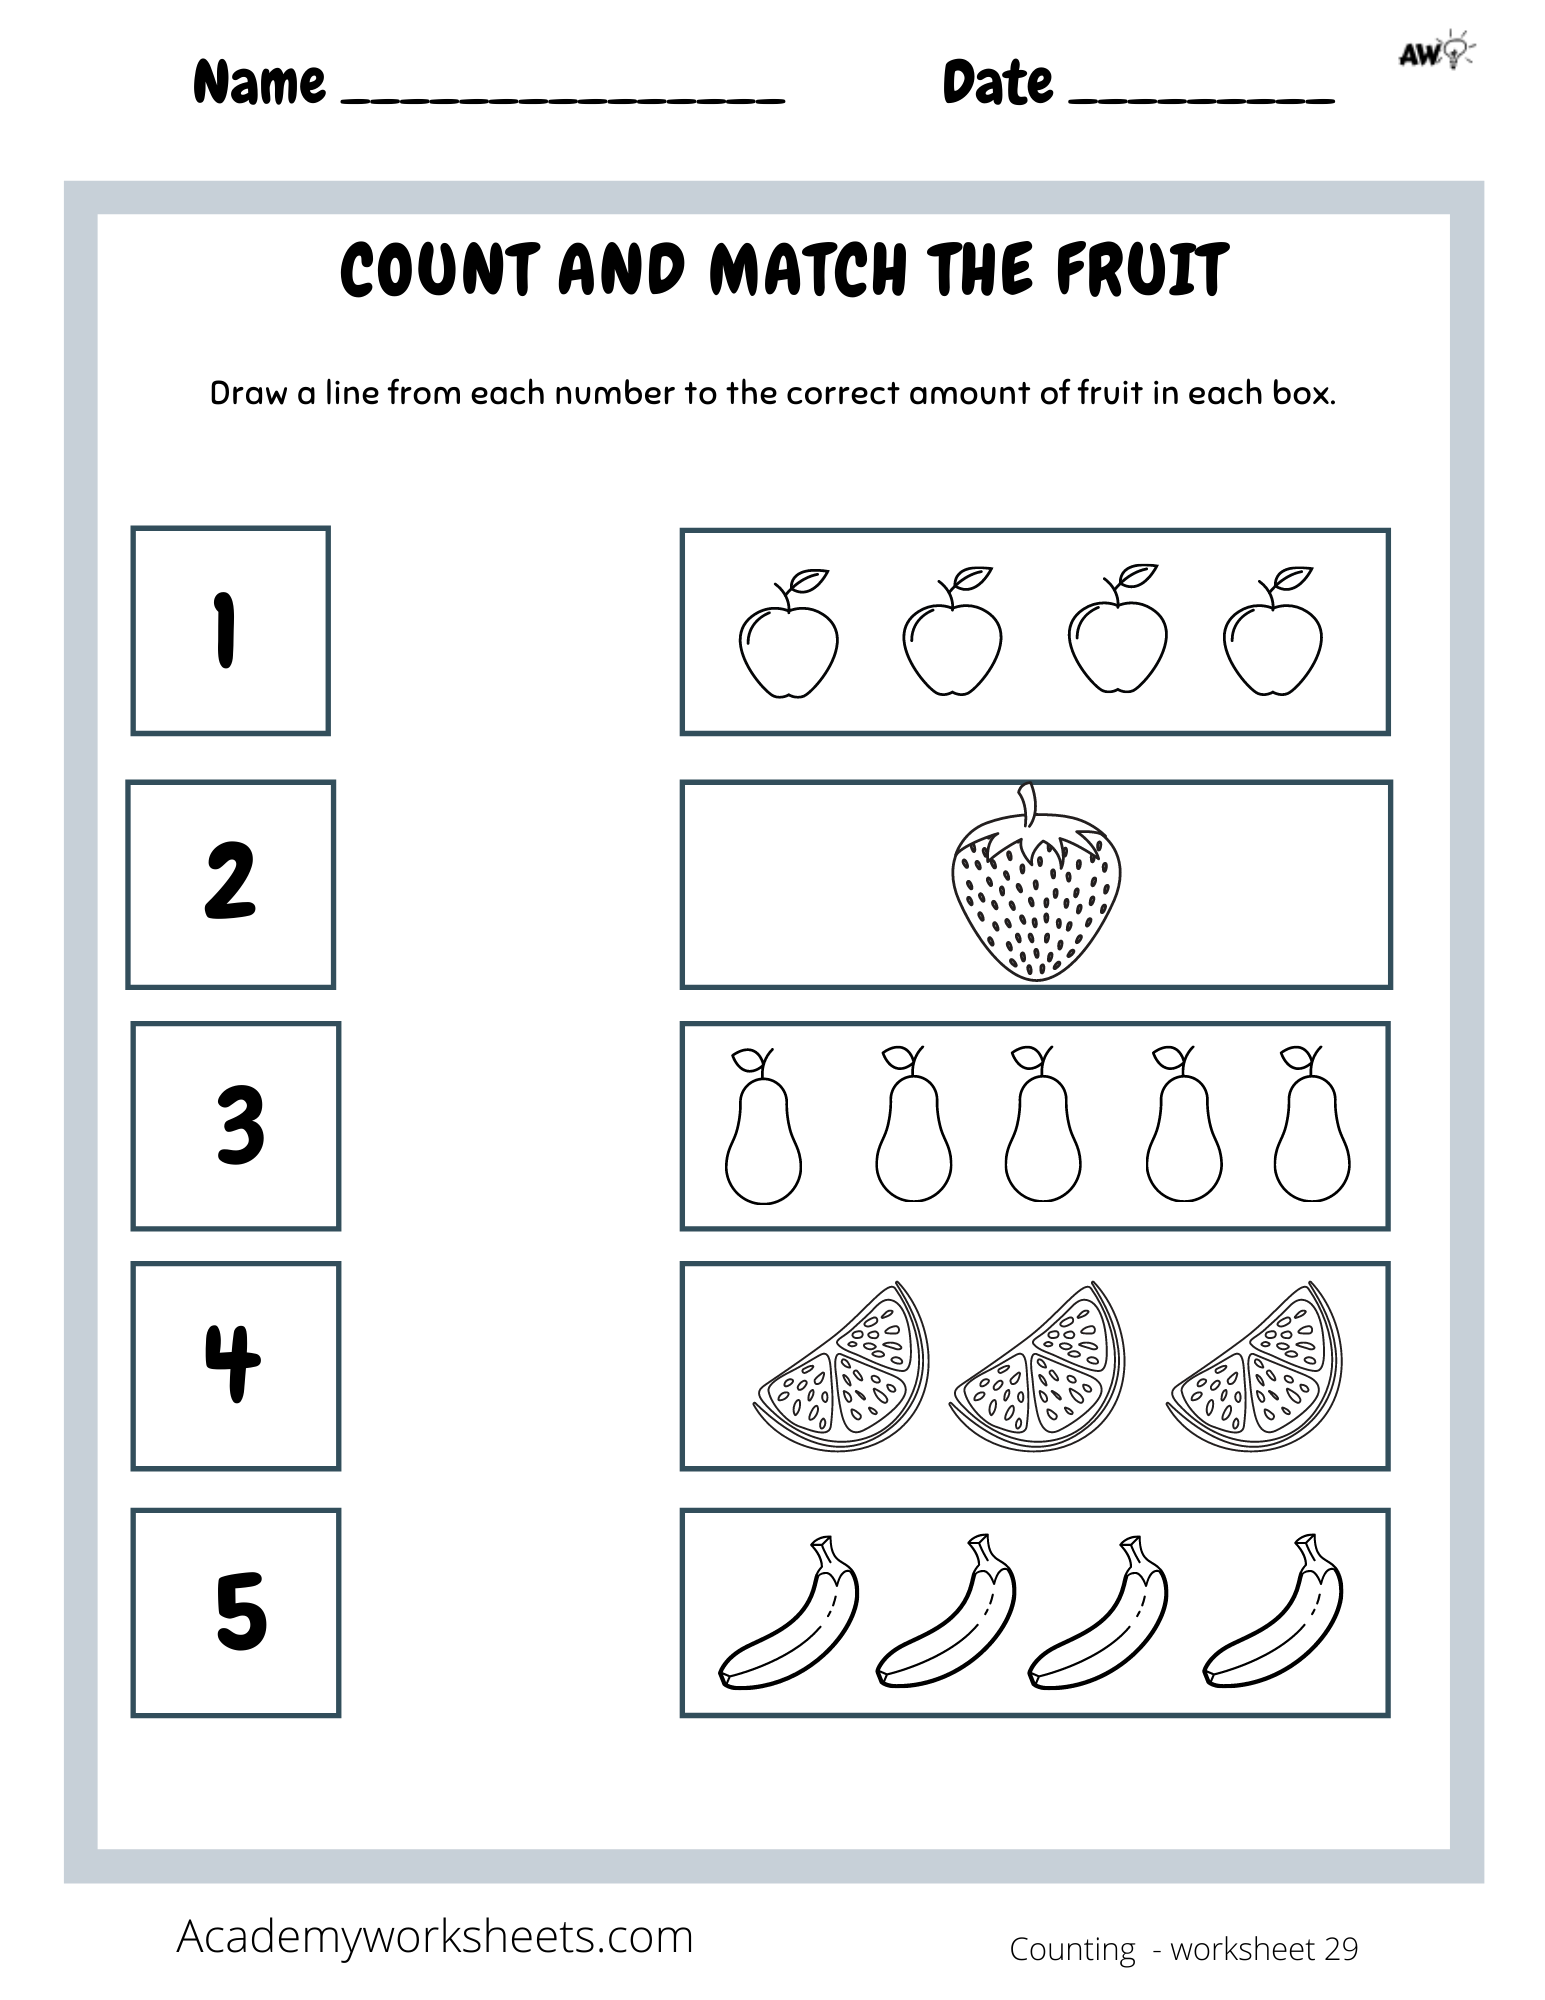 number-to-number-matching-1-5-worksheet-numbers-1-5-free-worksheet-poppy-maexyandrews52i